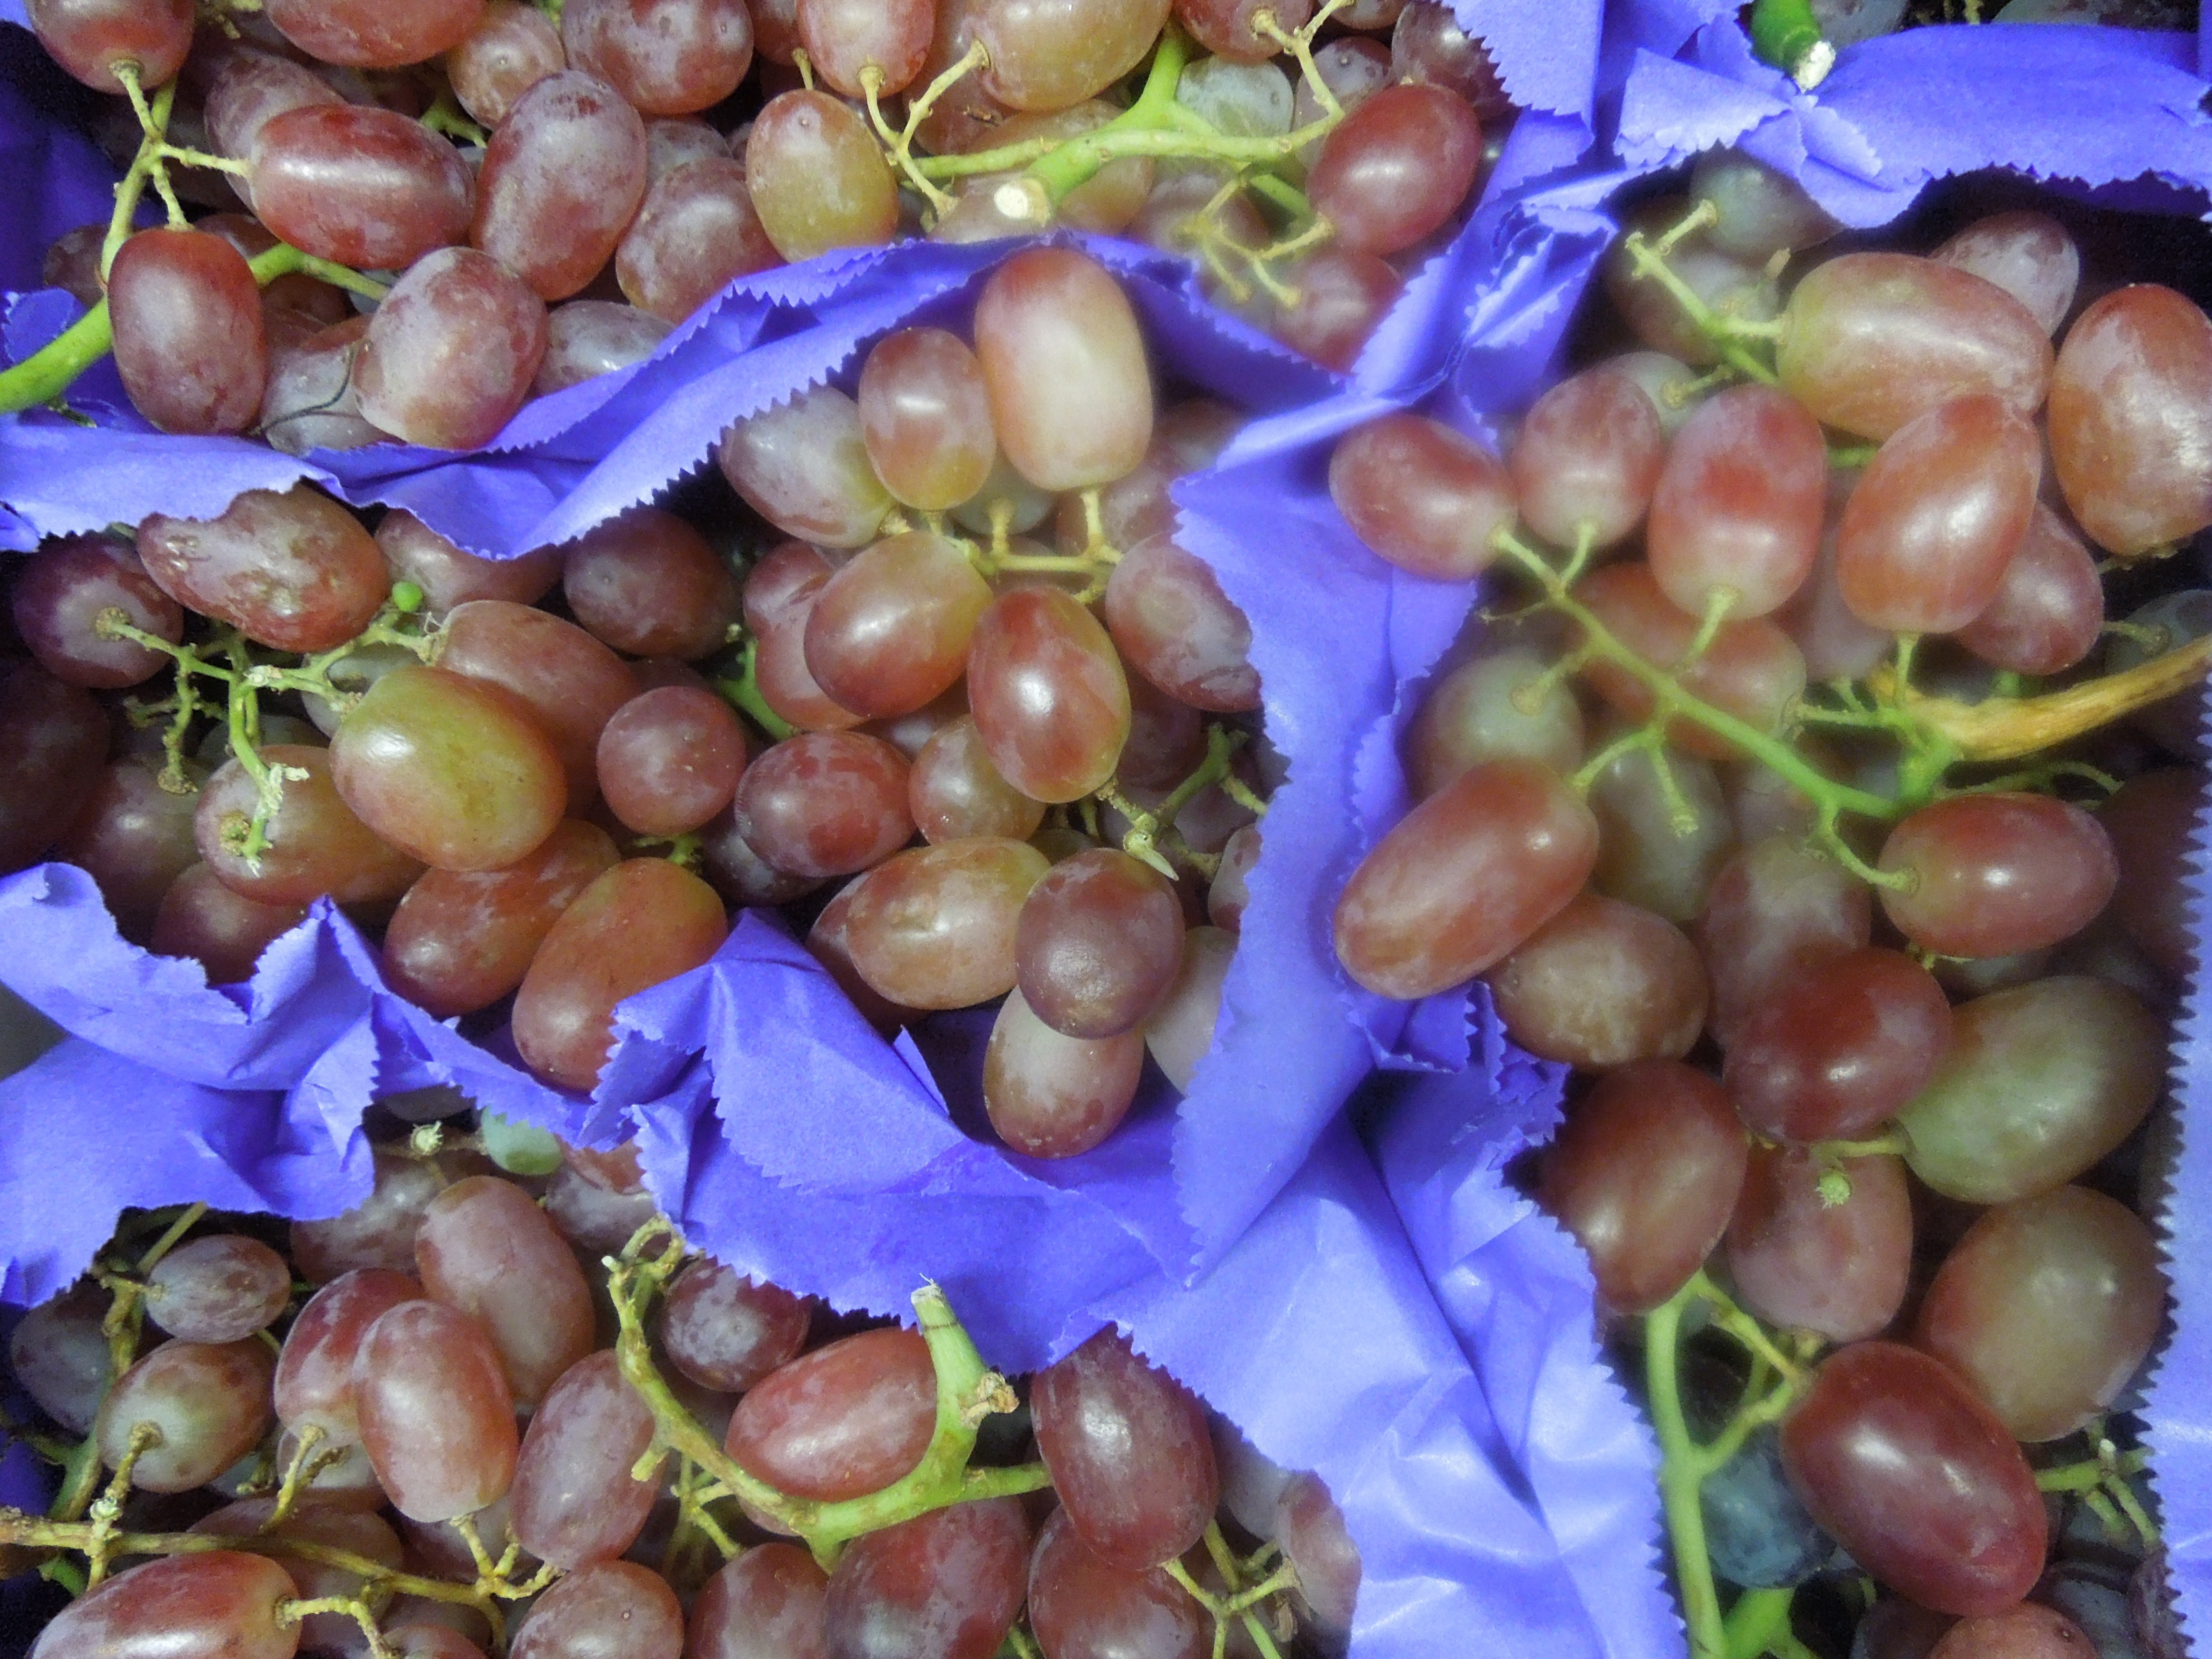 Grapes, Red Grapes, Fruit, Juicy, Food, food and drink, food